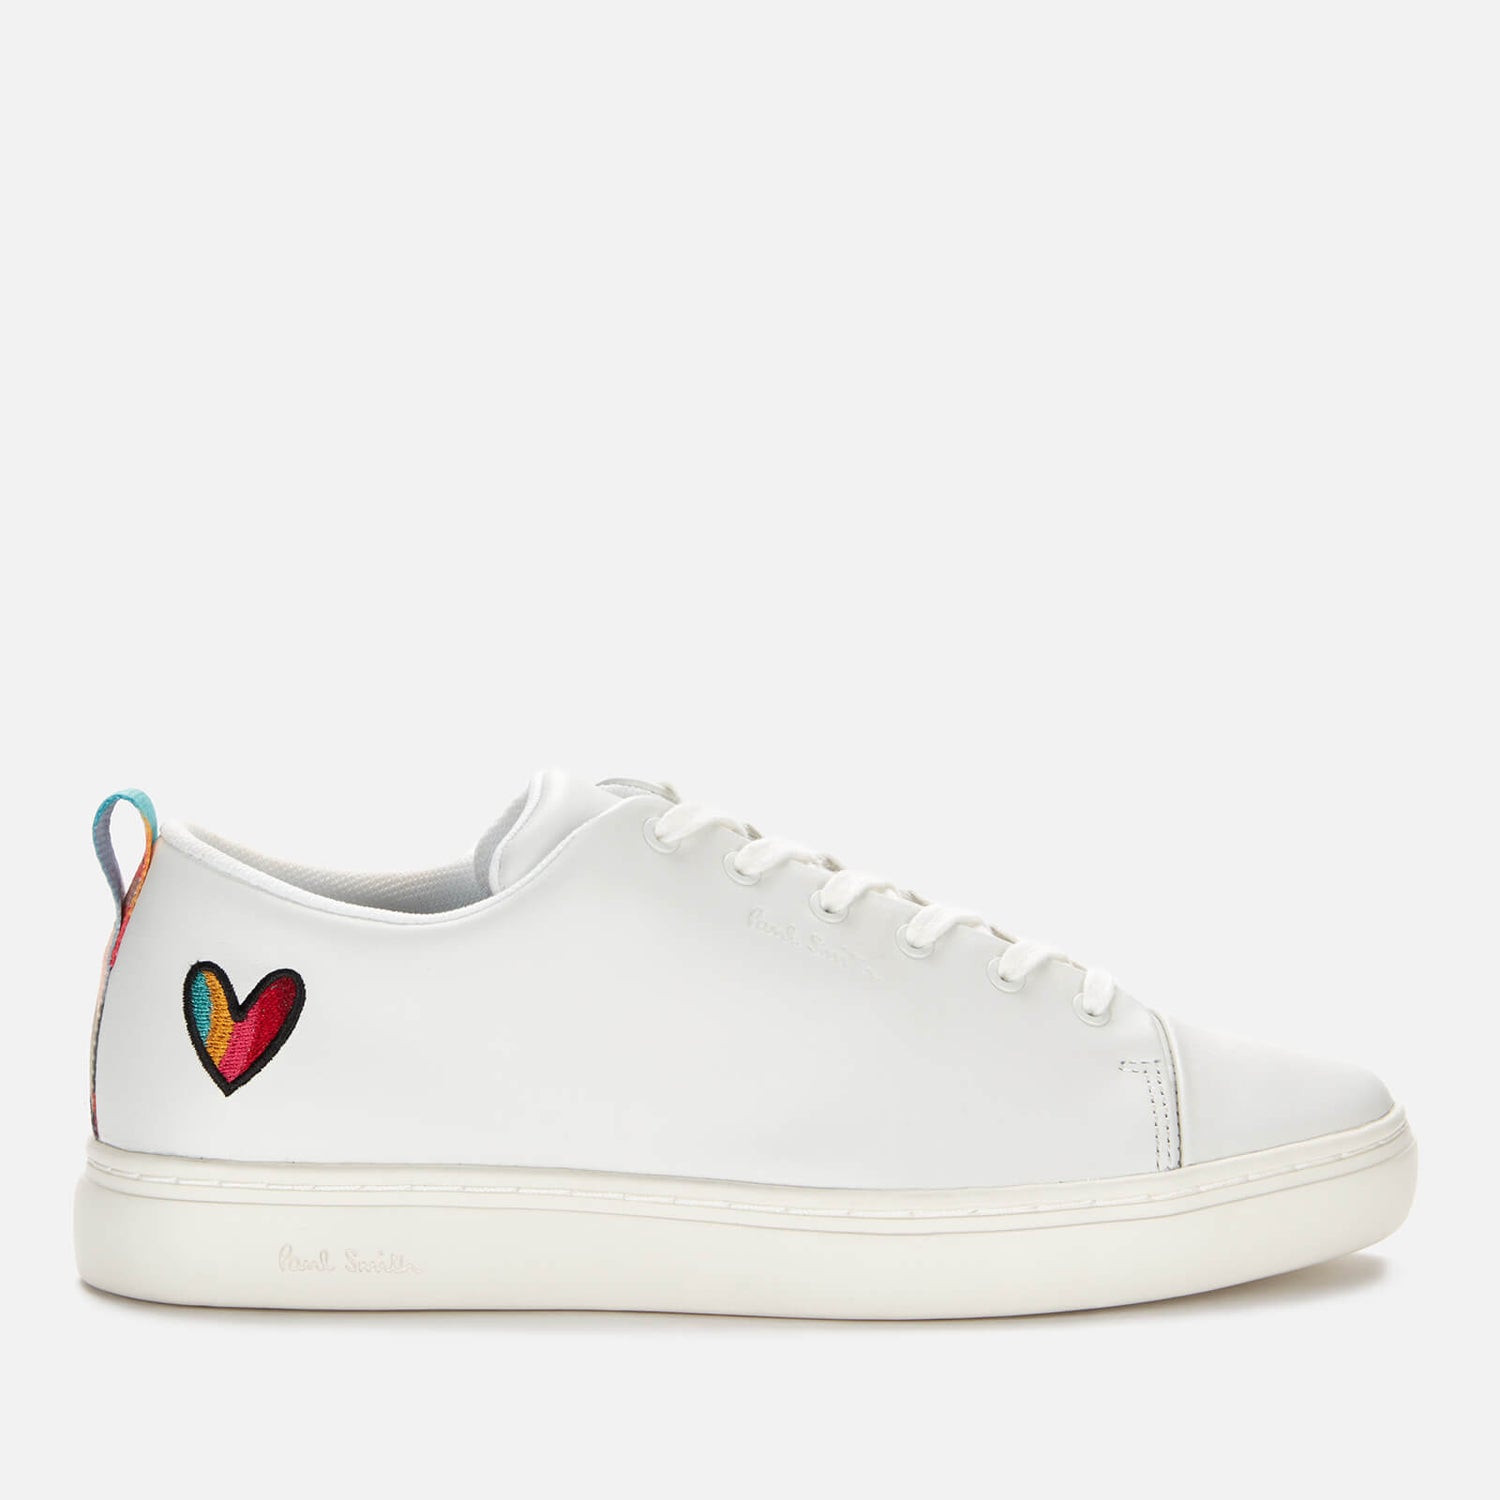 Paul Smith Women's Lee Leather Cupsole Trainers - White Heart - UK 4